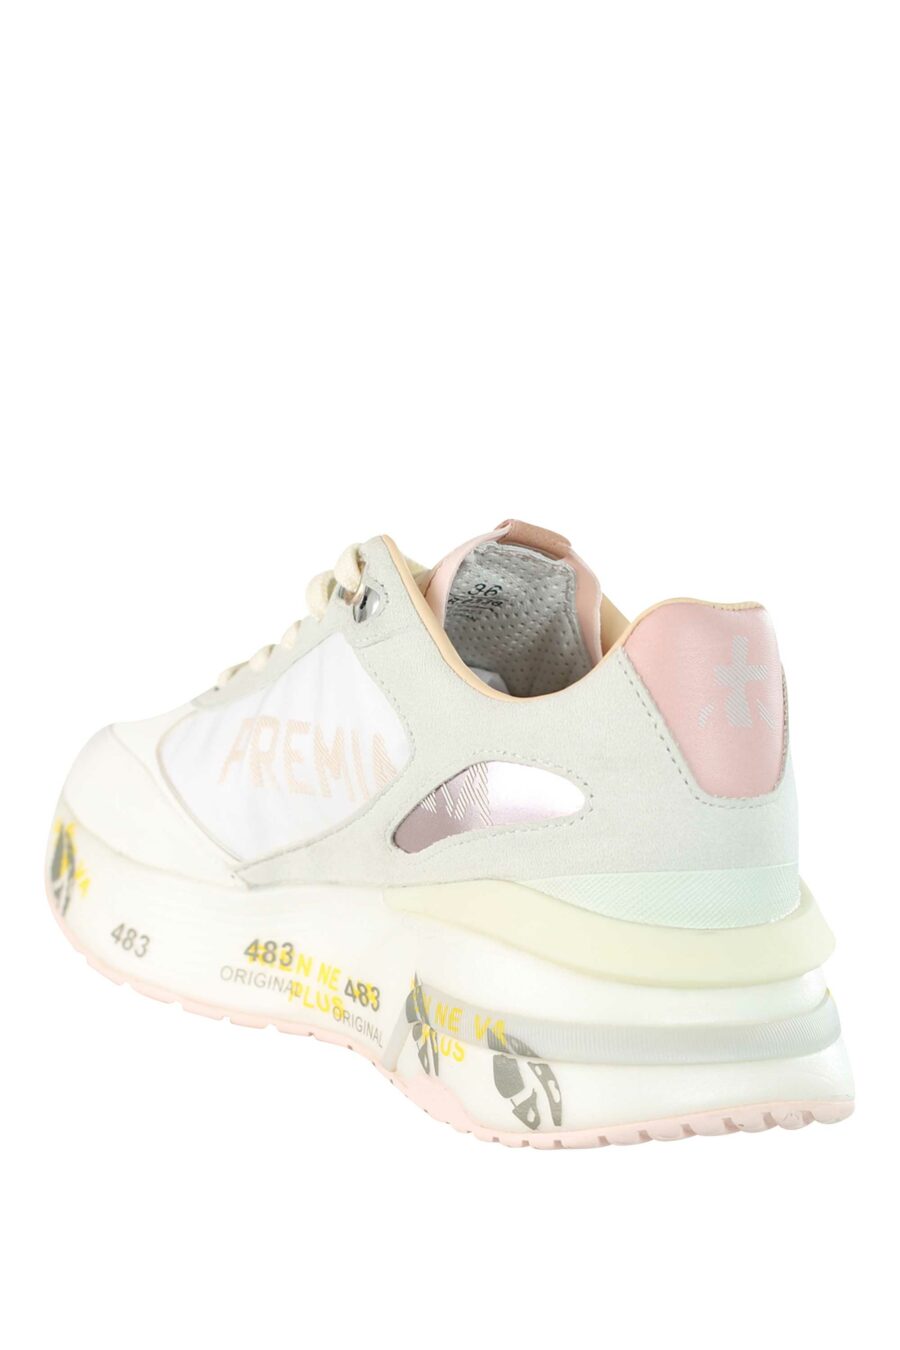 White trainers with pink and grey "moe run-d 6338" - 8058326253473 4